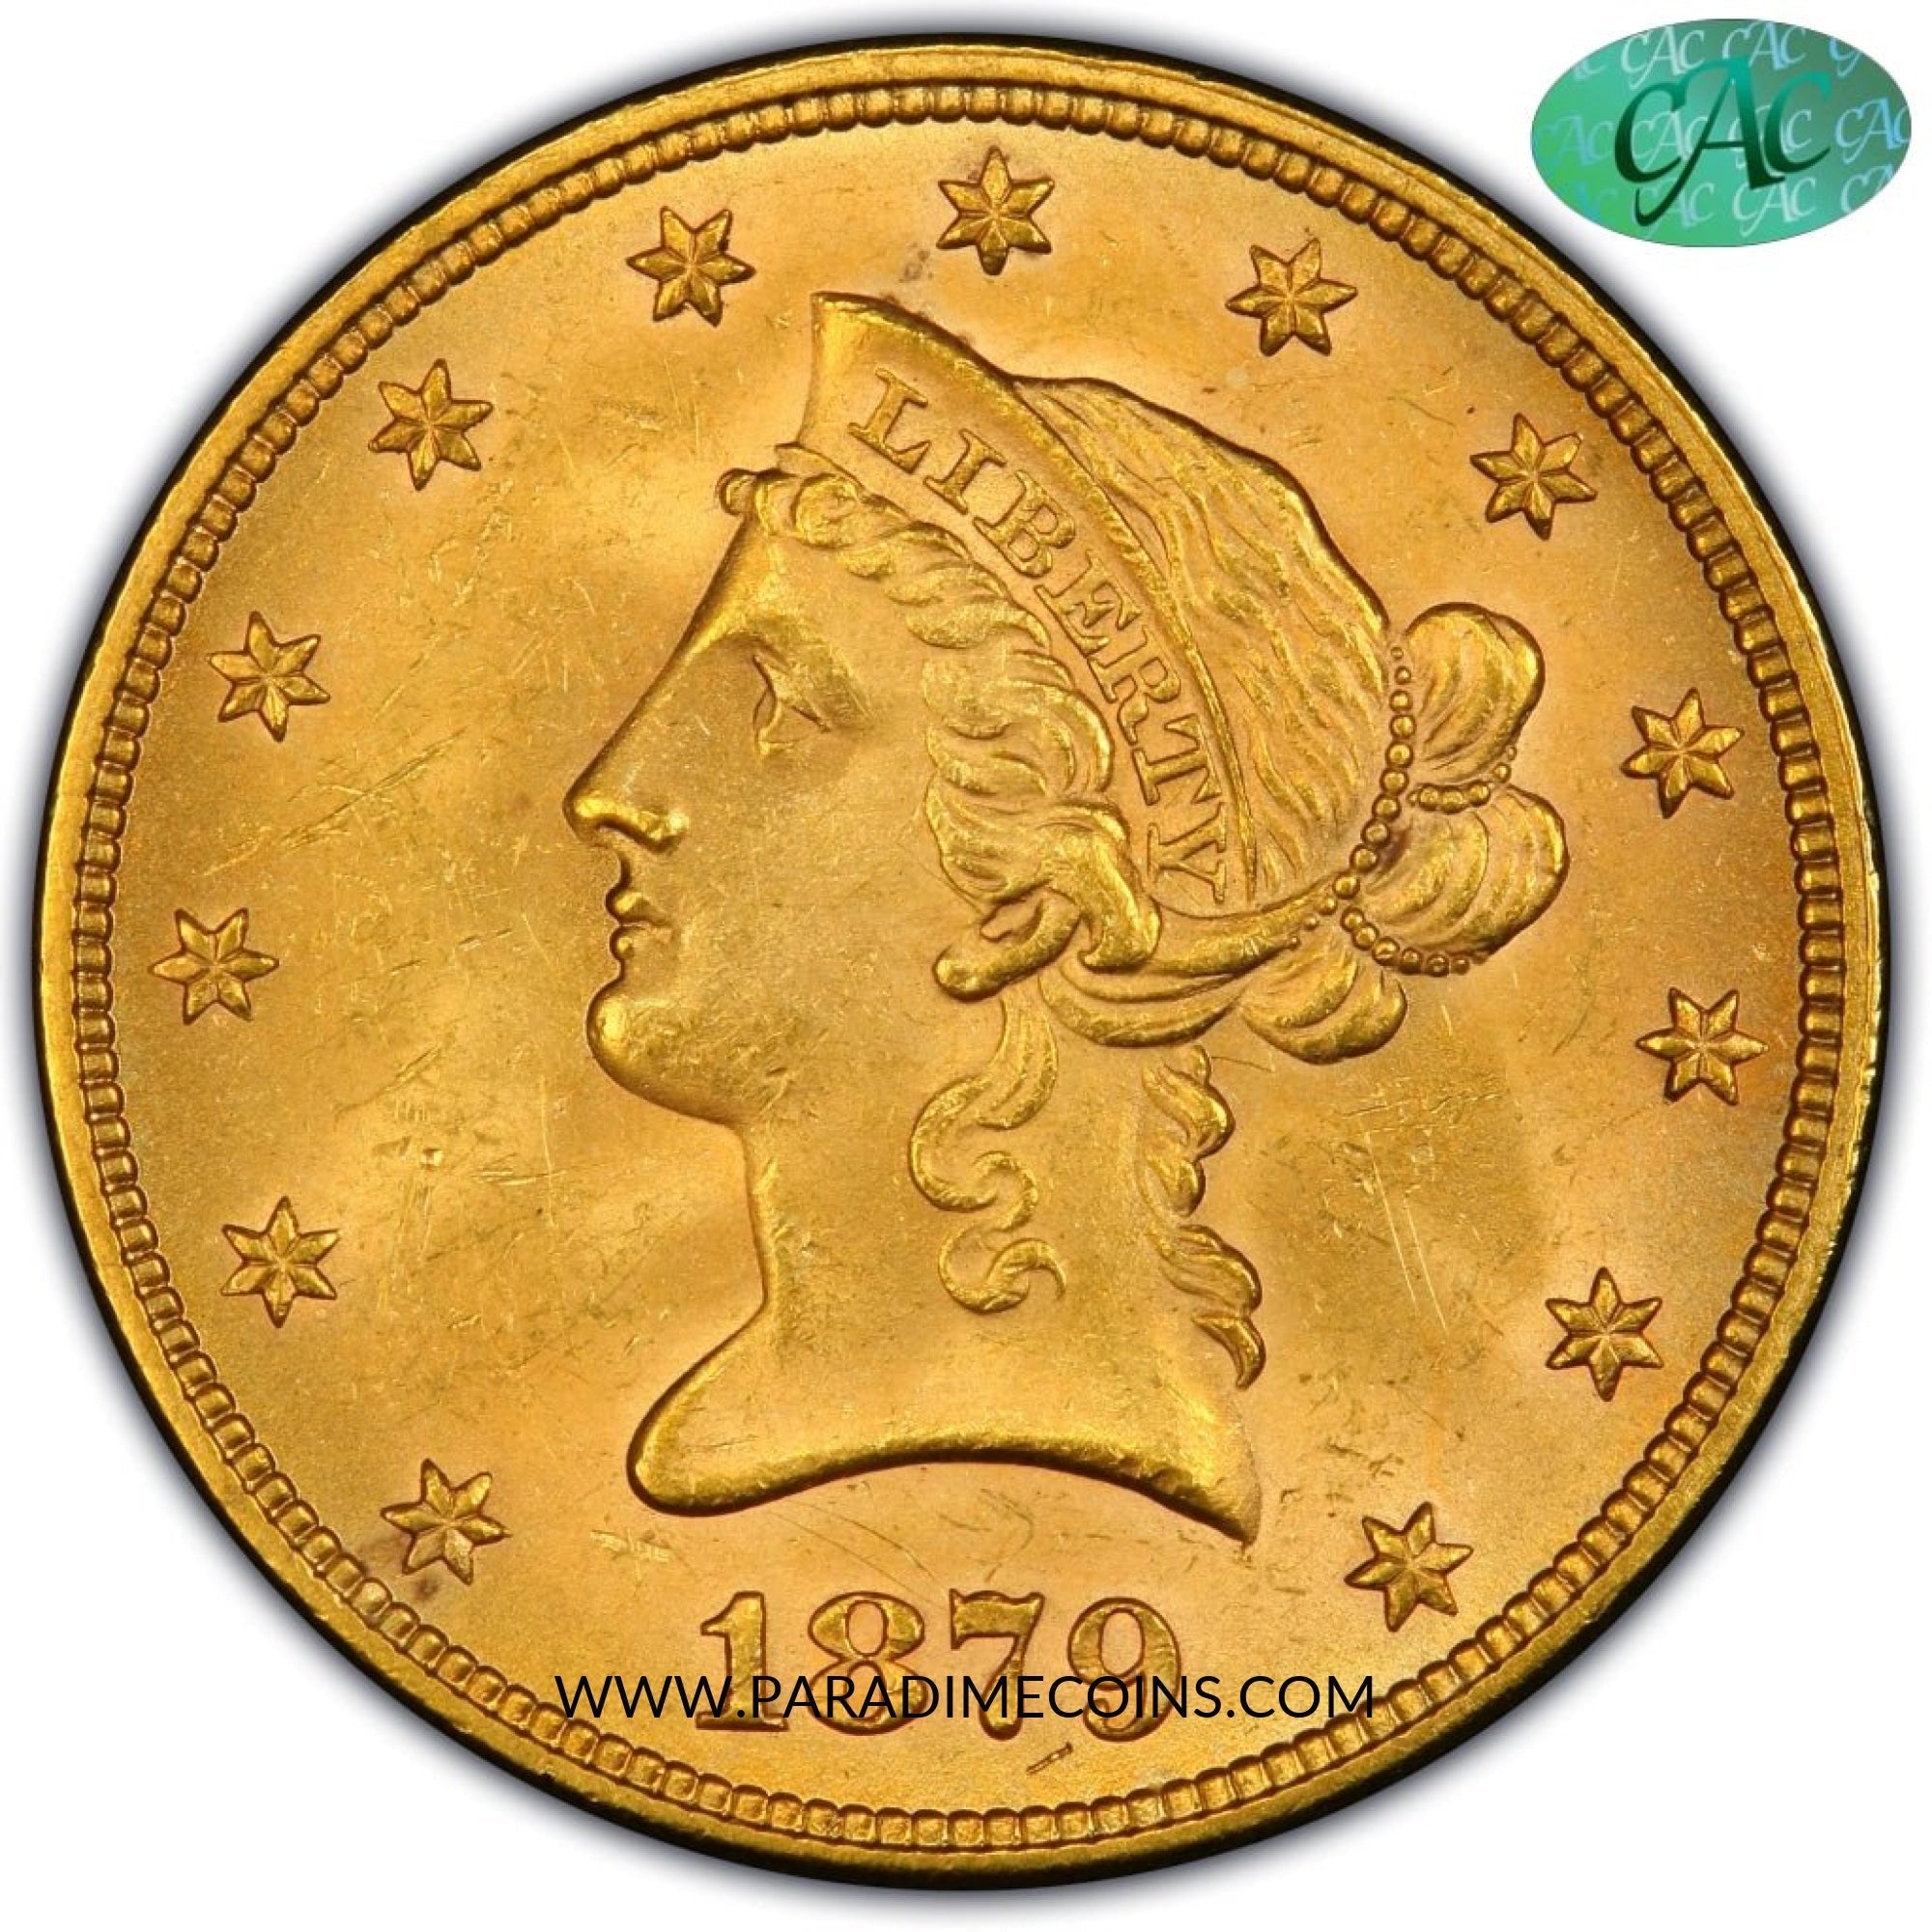 1879 $10 MS64 PCGS CAC - Paradime Coins | PCGS NGC CACG CAC Rare US Numismatic Coins For Sale